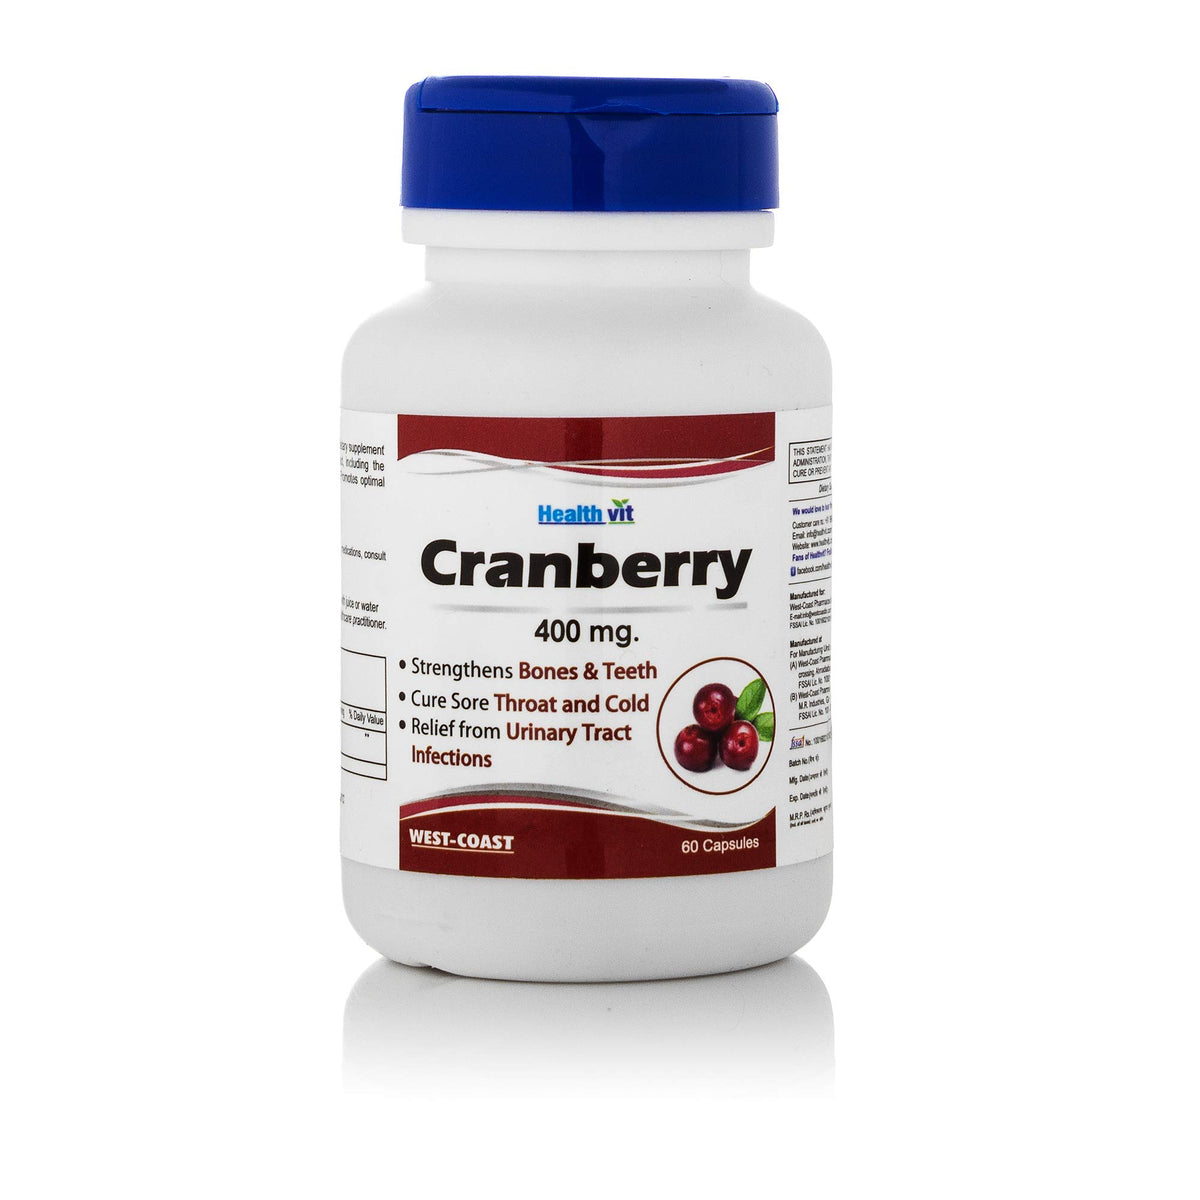 Healthvit Pure Cranberry Extract 400mg For Strengthens Bones & Teeth | Relief From UTI | Promotes Optimal Immune System | 100% Natural And Vegan | 60 Capsules